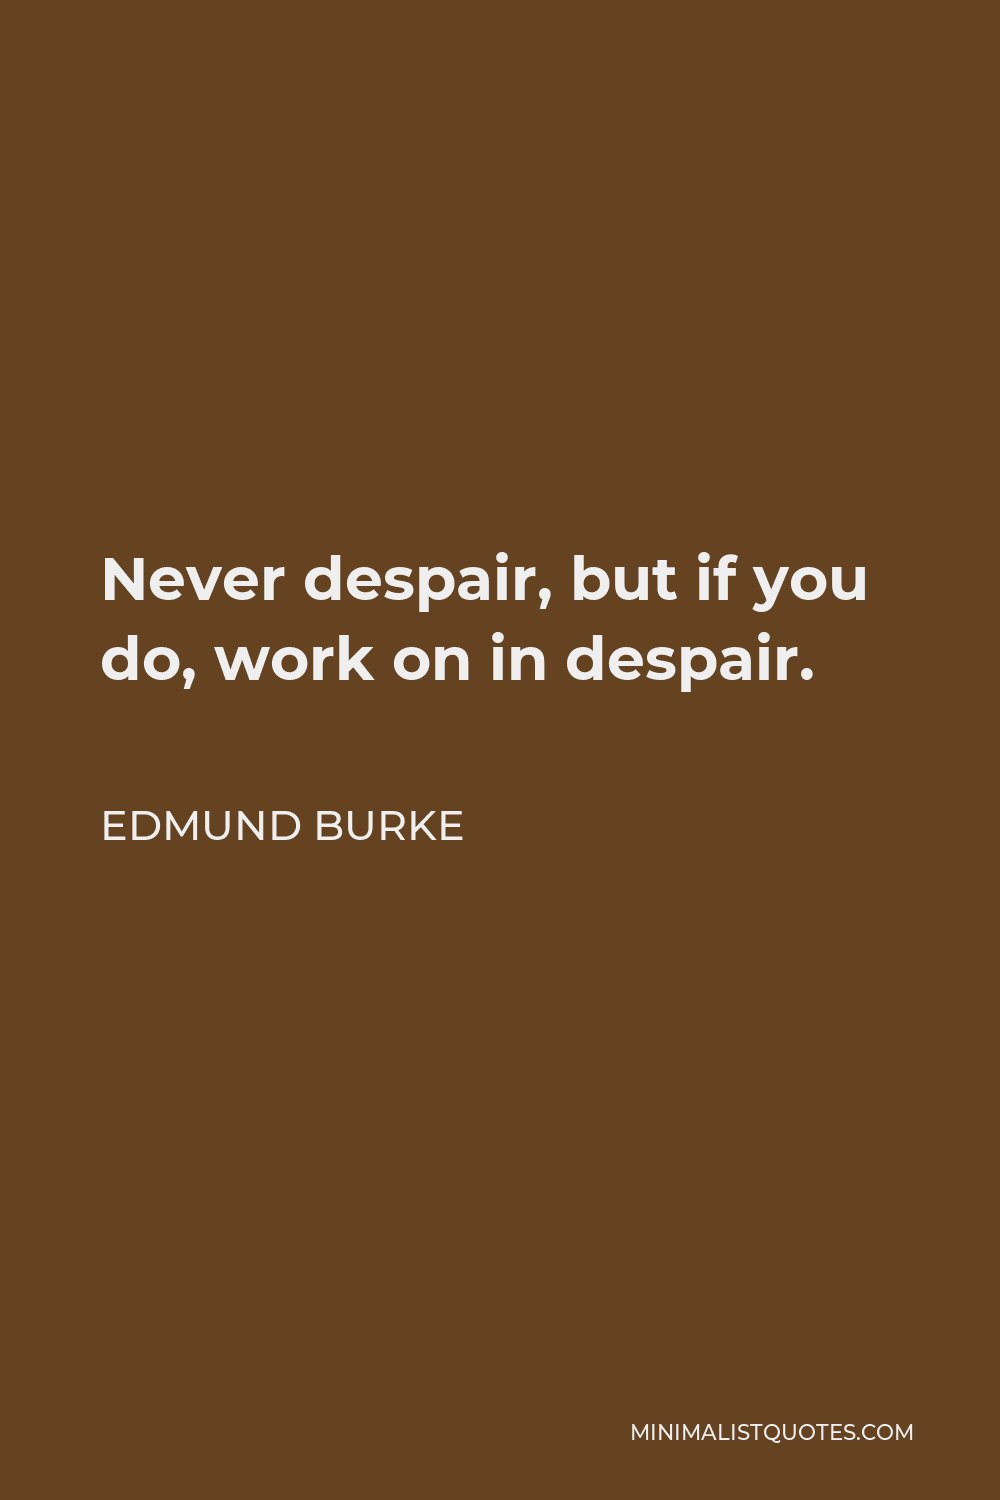 Edmund Burke Quote - Never despair, but if you do, work on in despair.